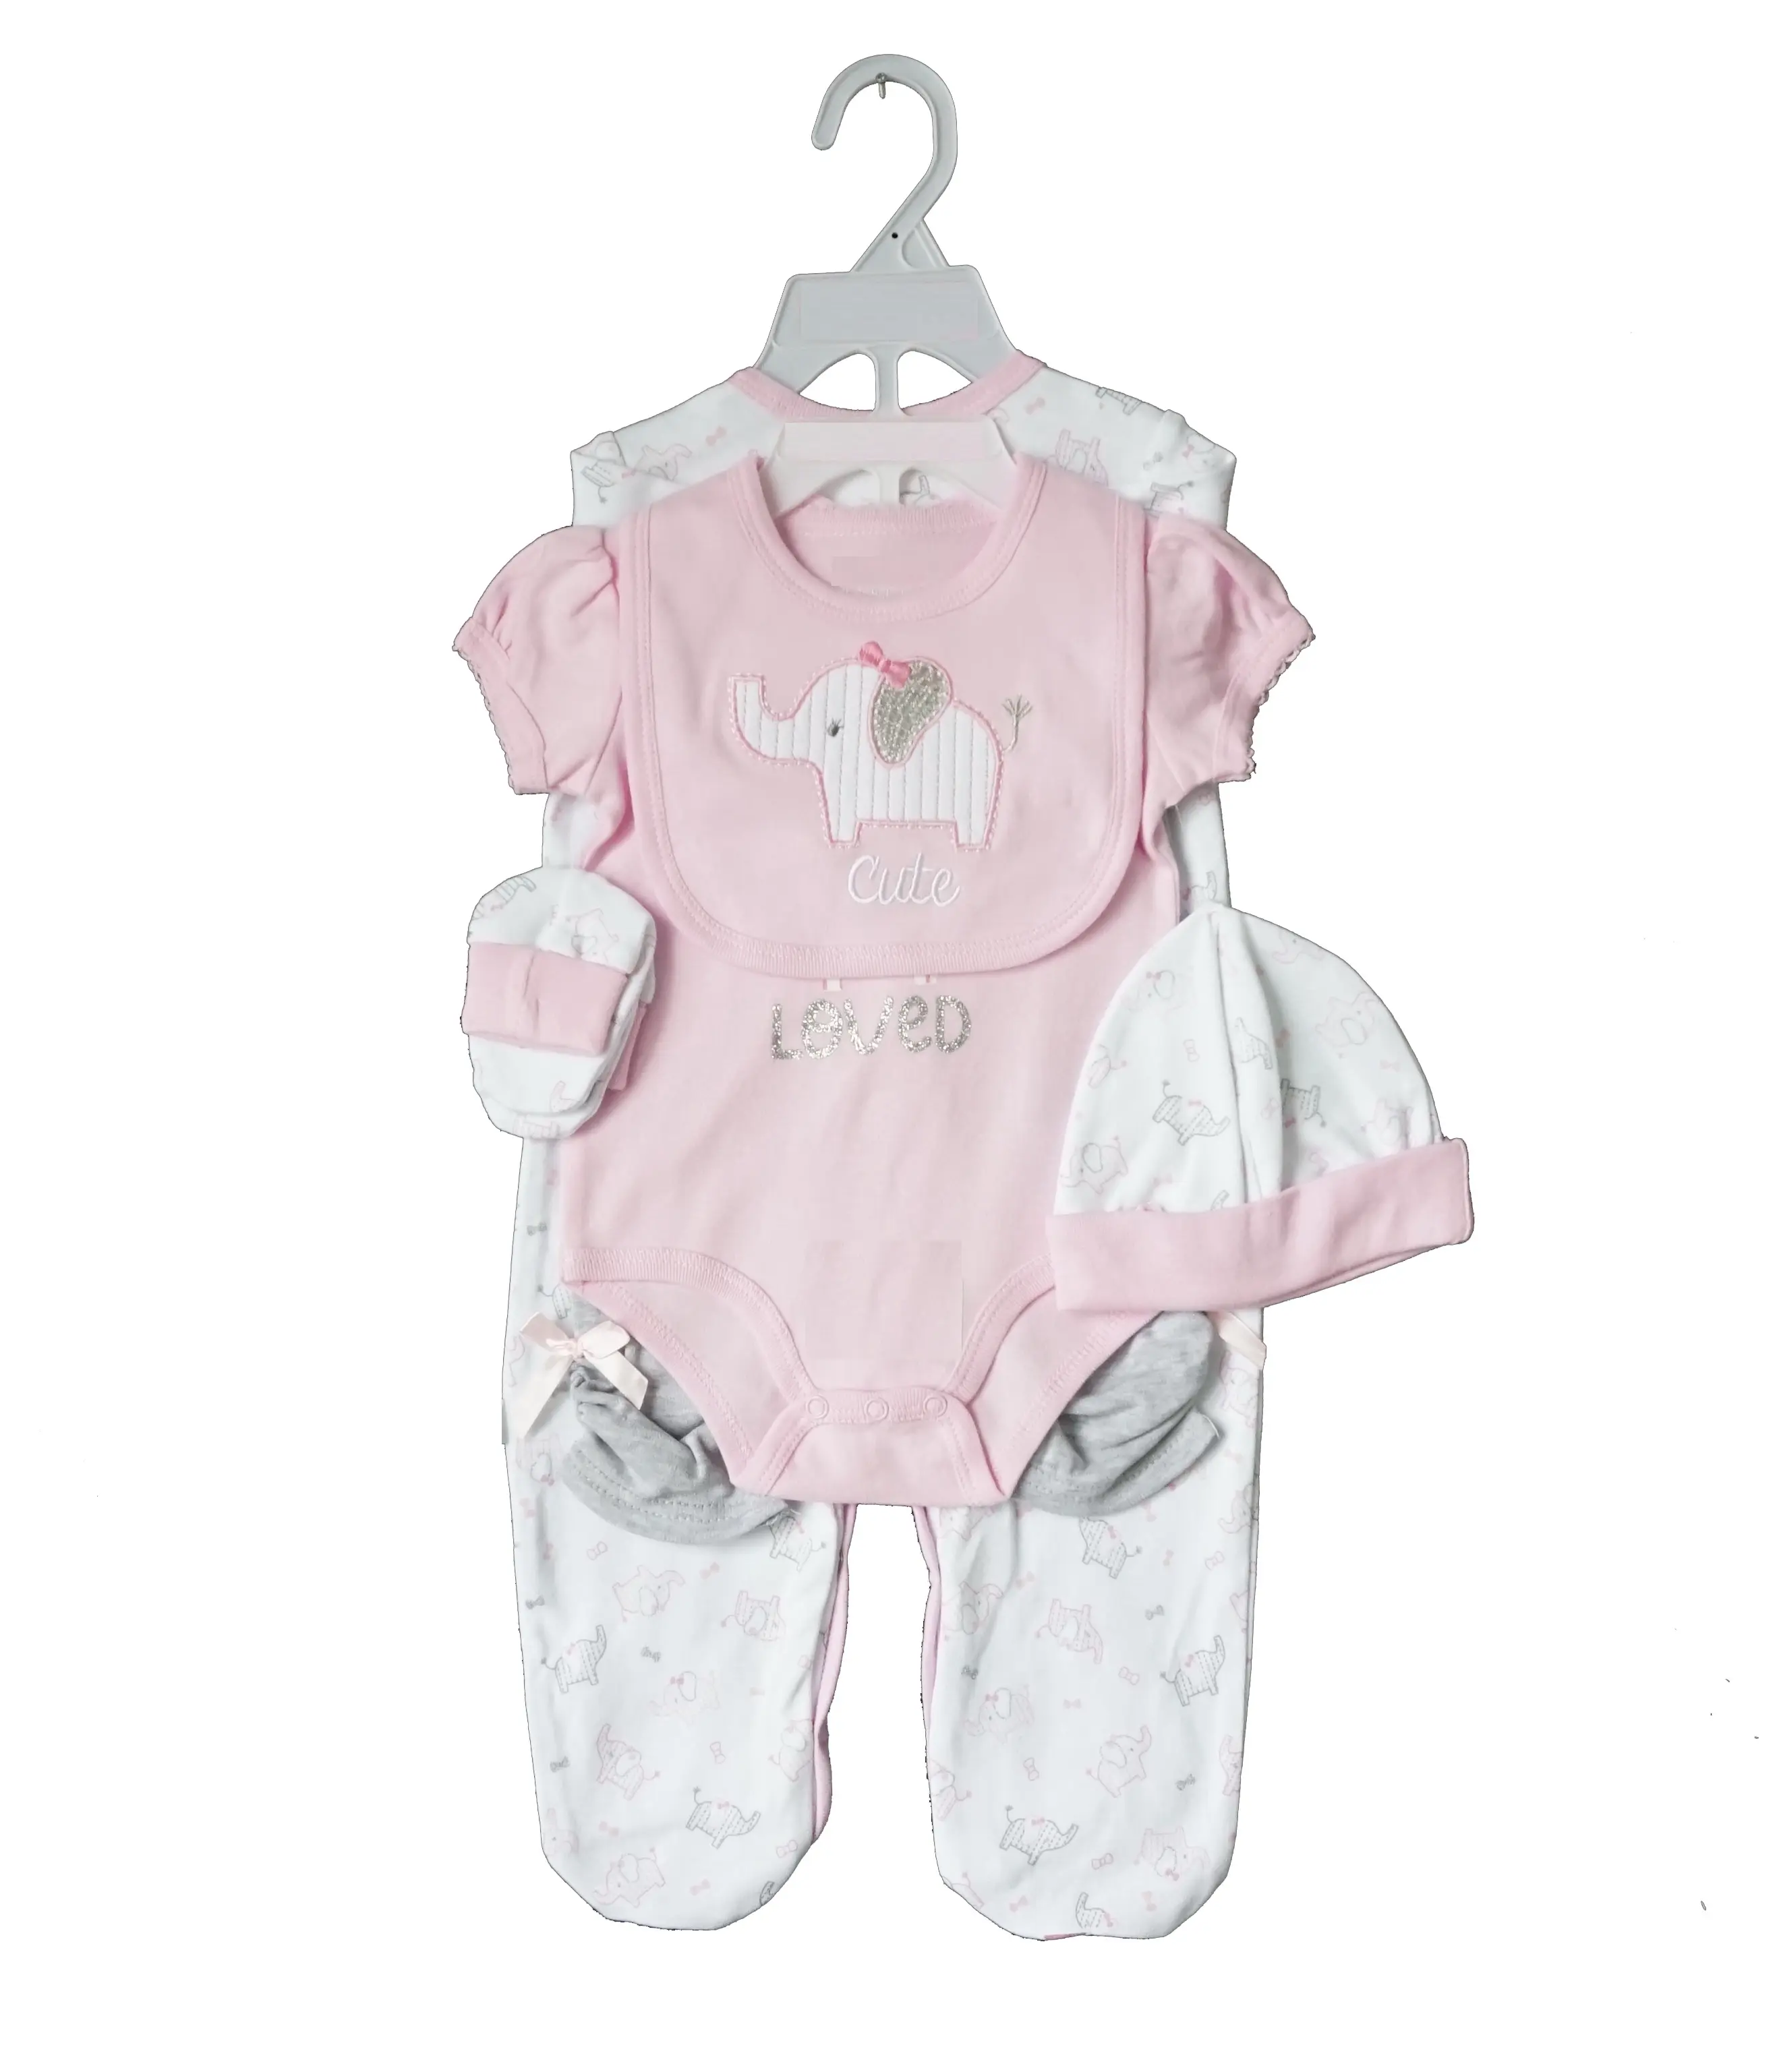 Baby fashion 2023 baby suits clothes sleepsuit rompers newborn baby hats mittens socks gift set 2023